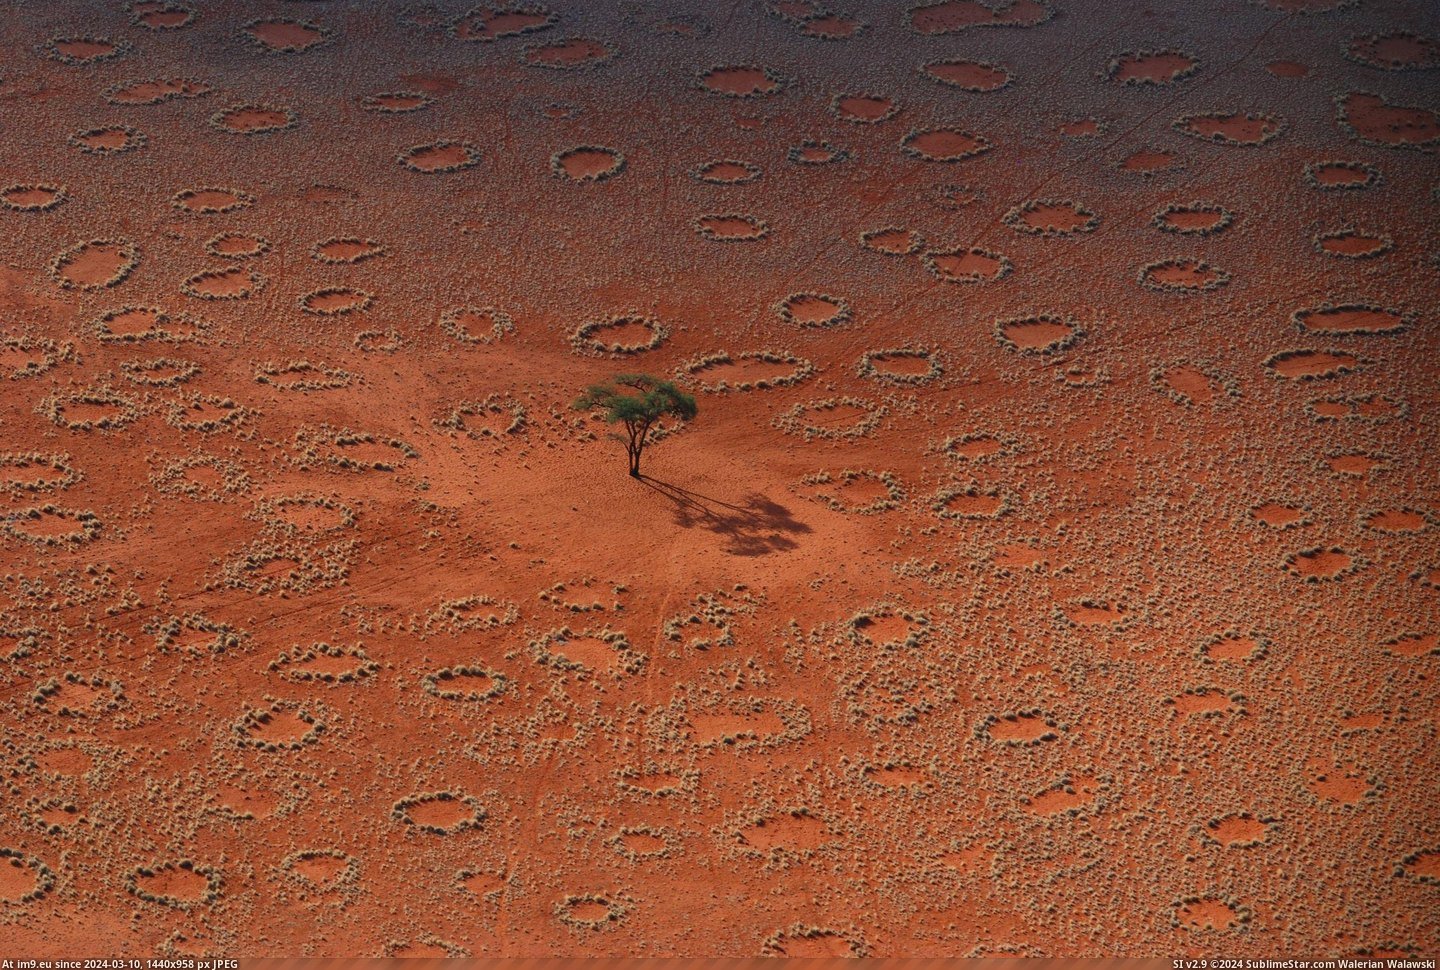 #Tree #Mysterious #Lone #Namibia #Circles #Fairy #Stands [Earthporn] A lone tree stands among the mysterious Fairy Circles of Namibia - [2600x1741] Pic. (Image of album My r/EARTHPORN favs))